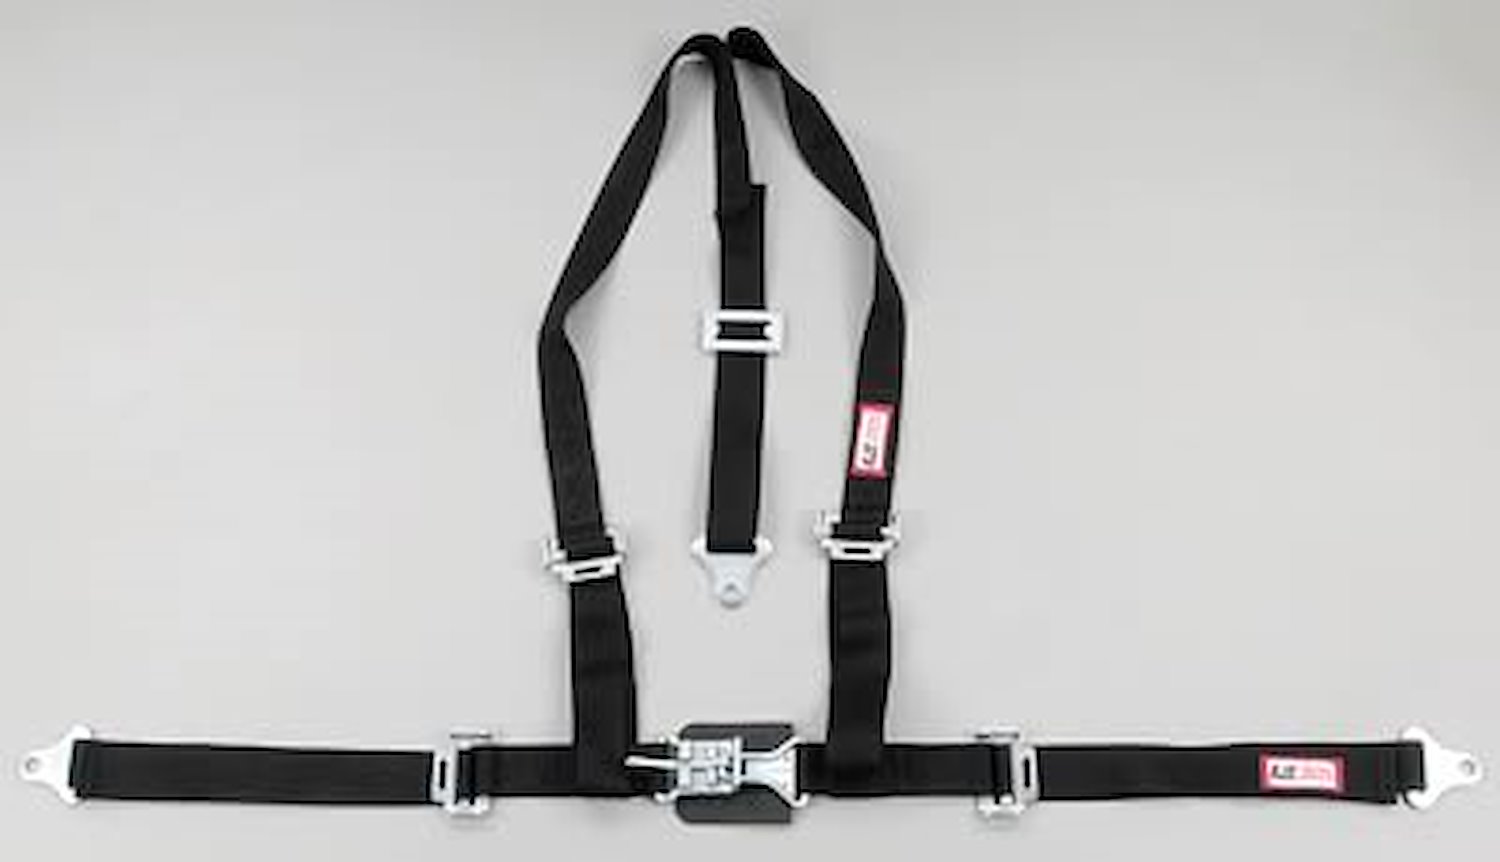 NON-SFI L&L HARNESS 3 PULL DOWN Lap BELT SEWN IN 2 S.H. Y FLOOR Mount ALL WRAP ENDS RED